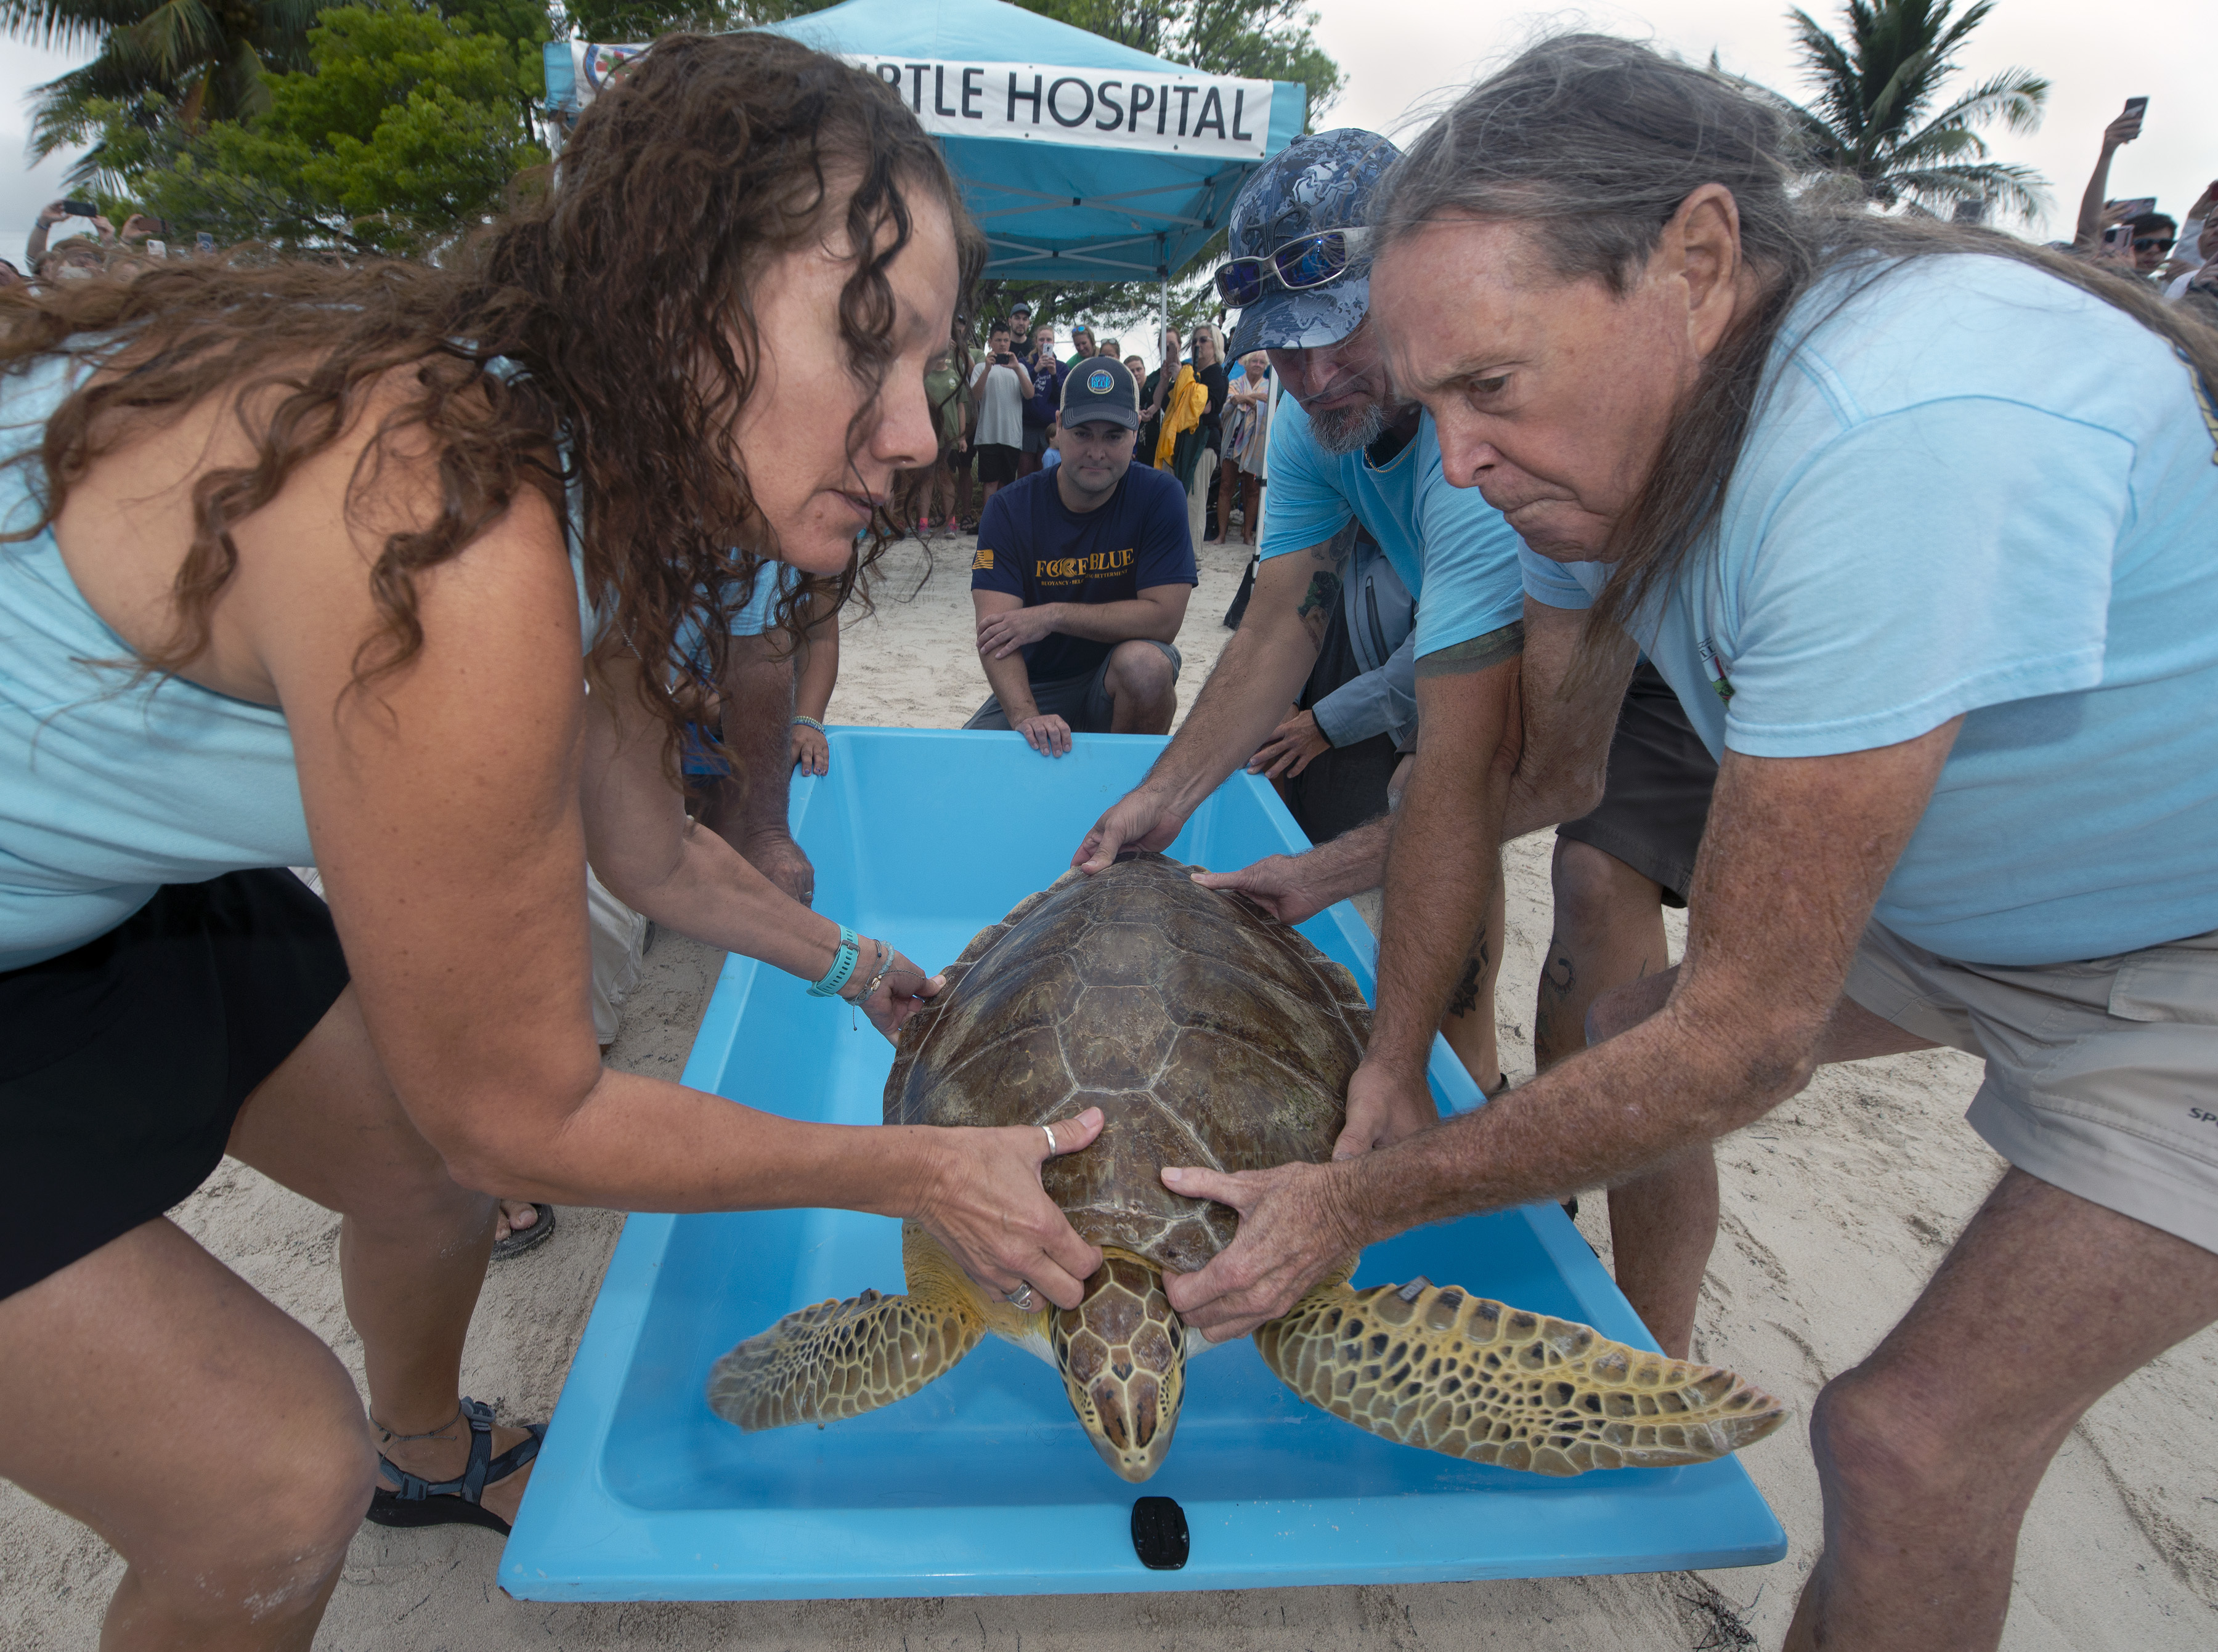 Bette Zirkelbach, left, manager of the Florida Keys-based Turtle Hospital, and hospital founder Richie Moretti, right, remove TJ Sharp, a juvenile green sea turtle, from a carrying tray before releasing the reptile into the ocean in honour of Earth Day in Marathon, Florida